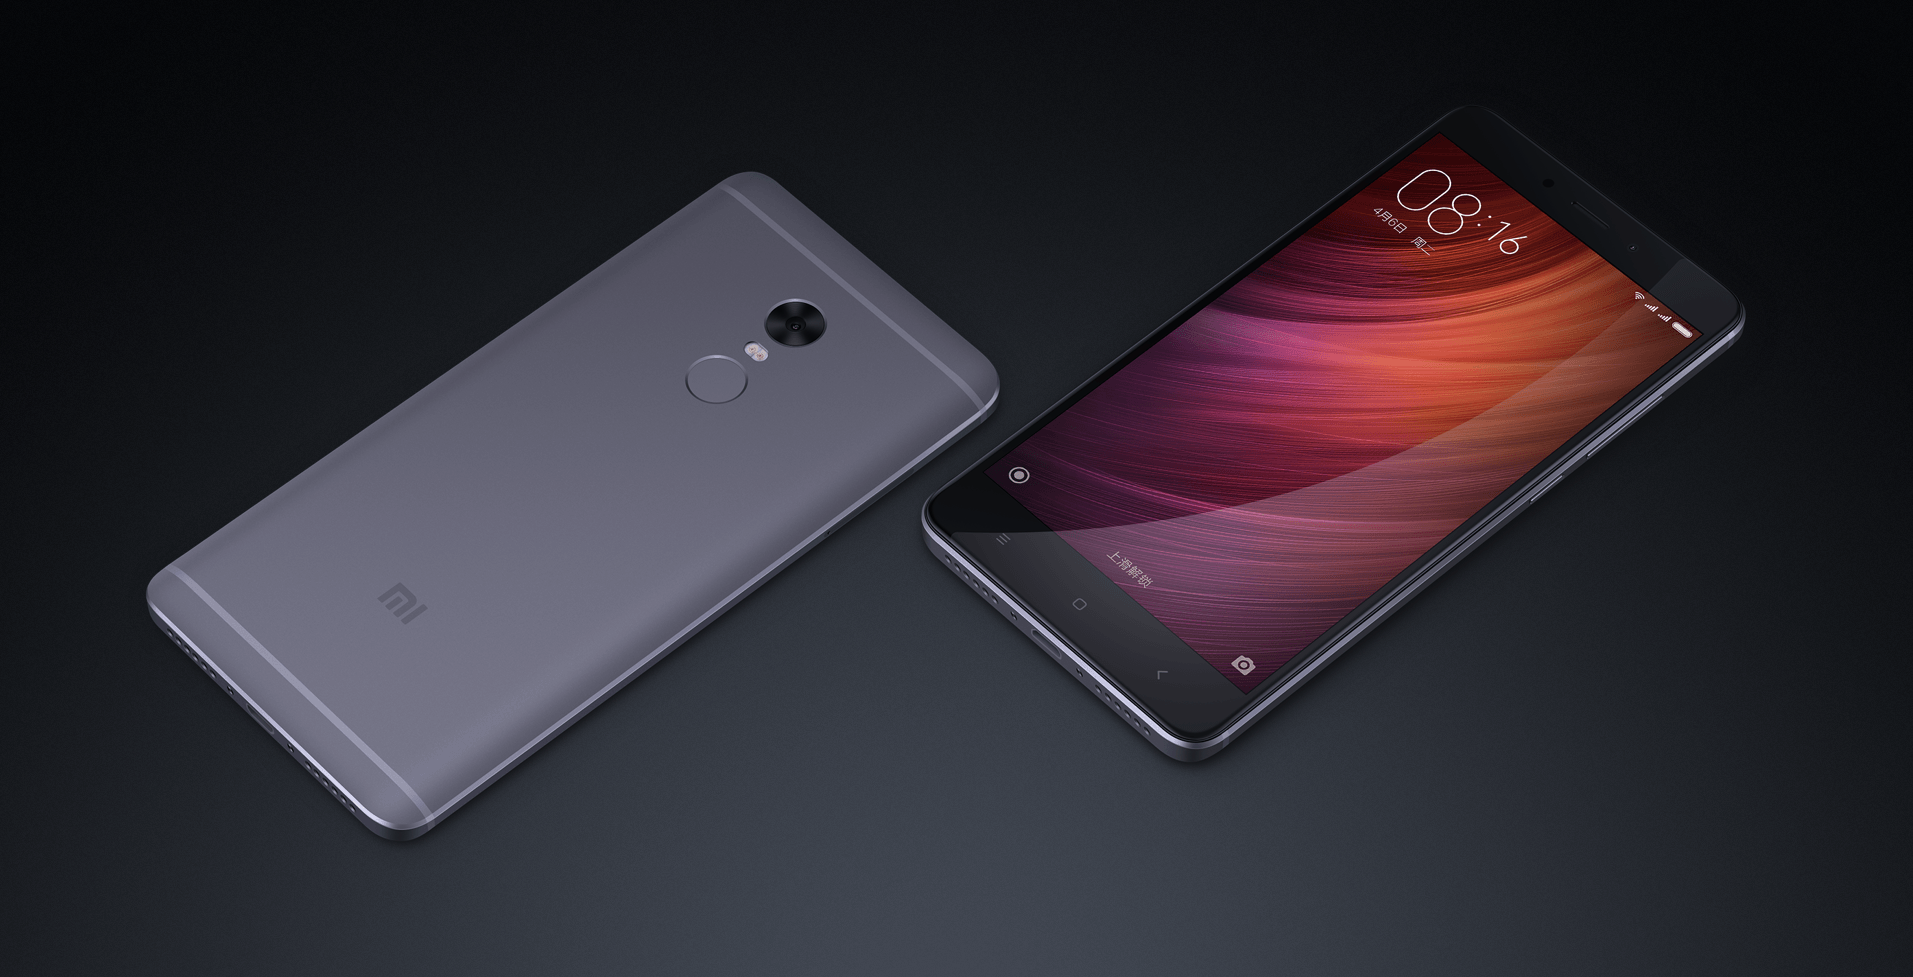 Download Android pie on Redmi Note 4